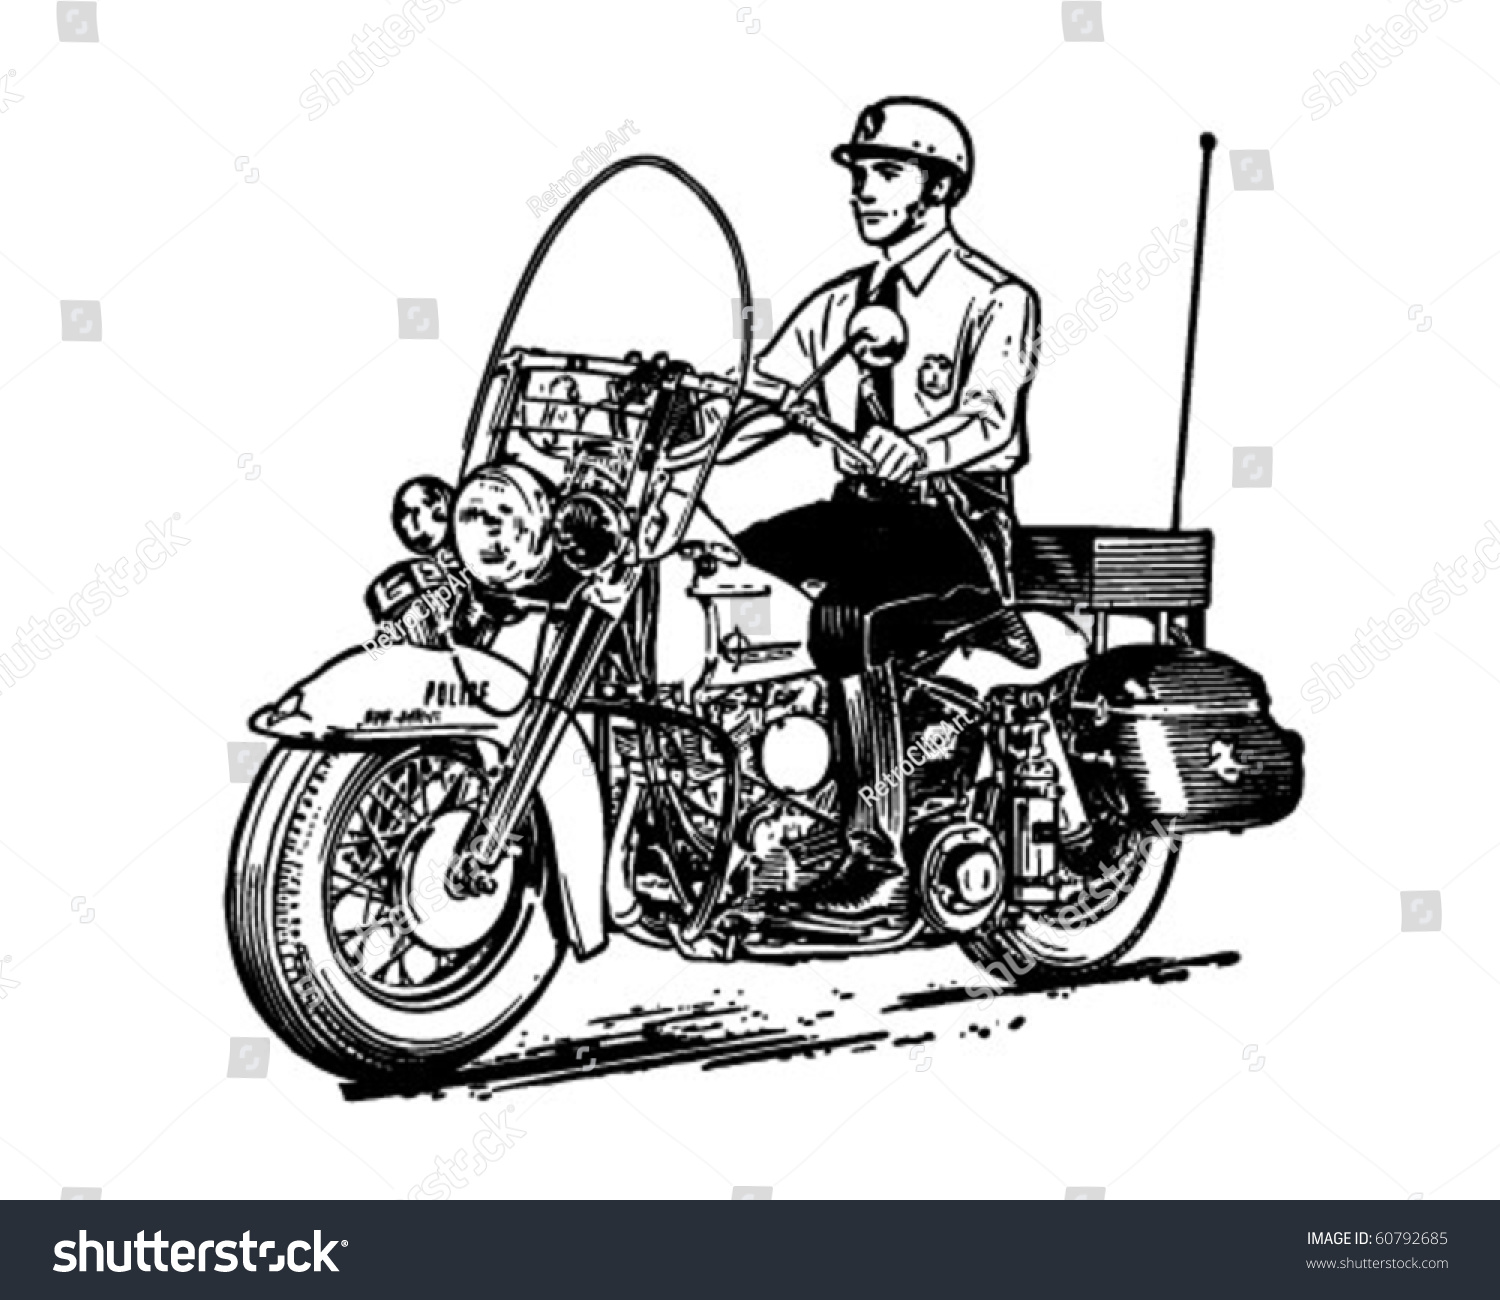 vintage motorcycle clipart - photo #23